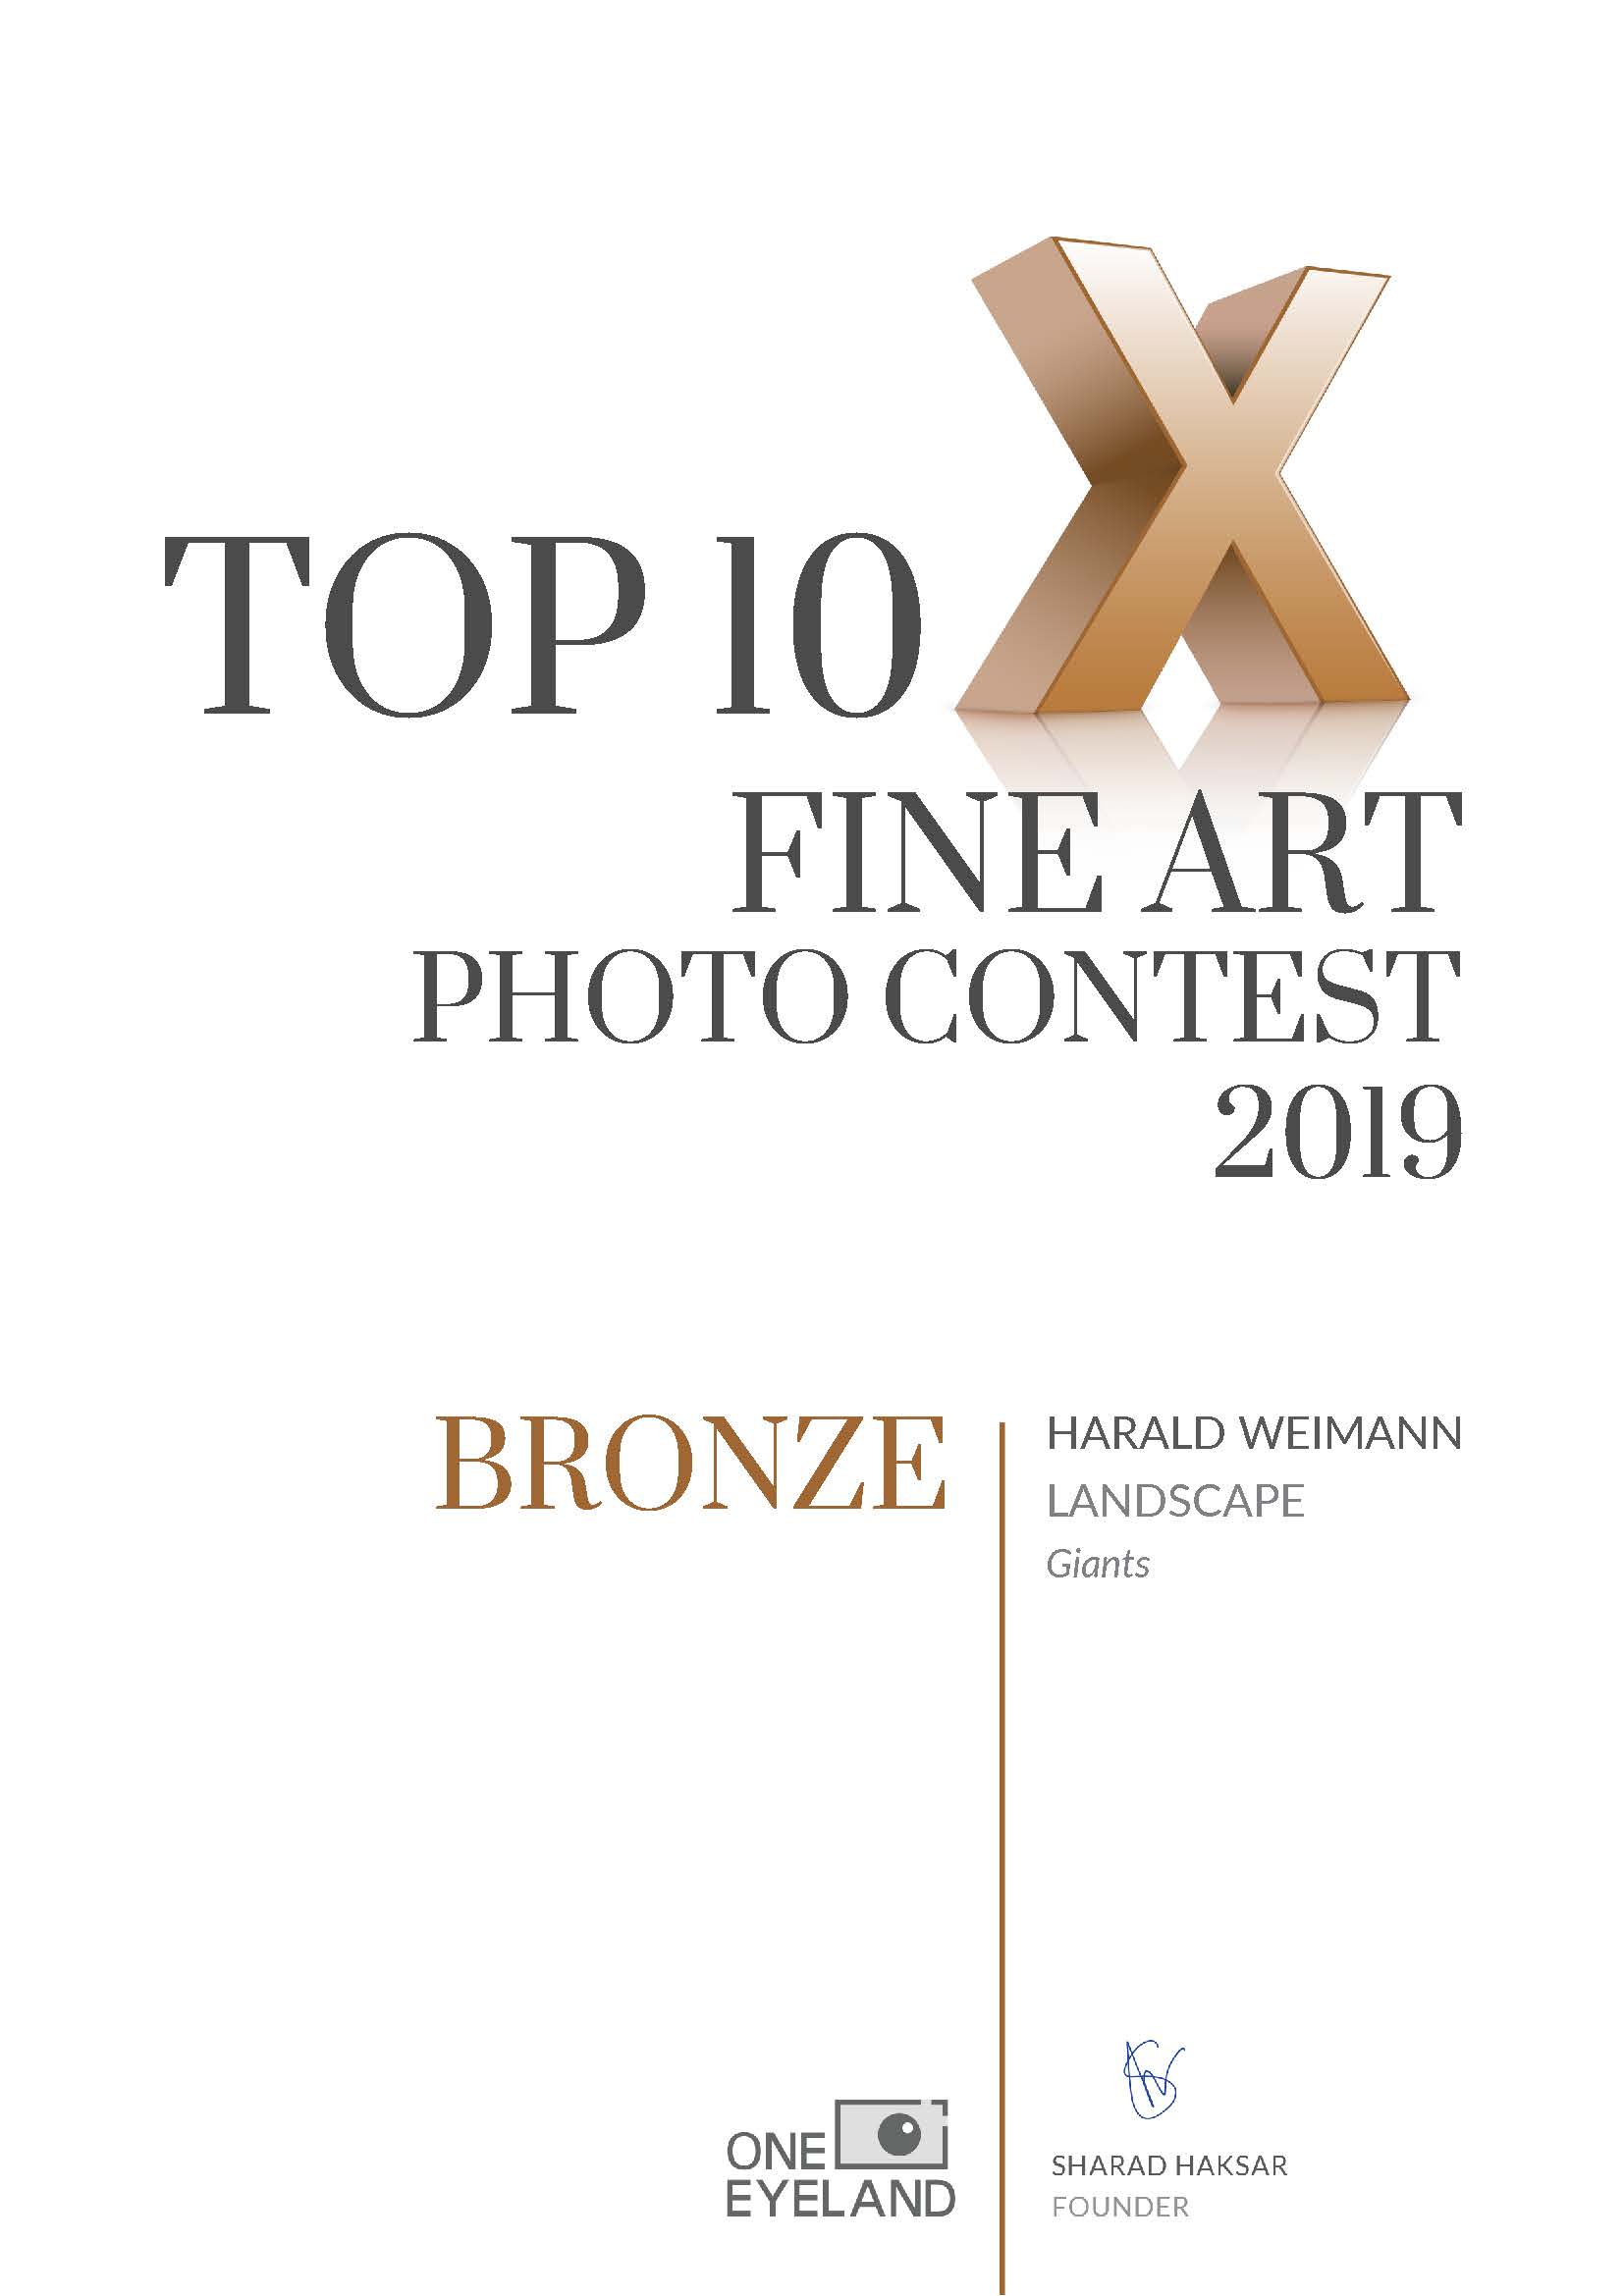 INNER OF PX3, Prix de la Photographie Paris

Harald Weimann of Germany was awarded Gold in the PX3 2018 Competition. 

Harald Weimann of Germany was Awarded: Gold in category Fine Art for the entry entitled, 